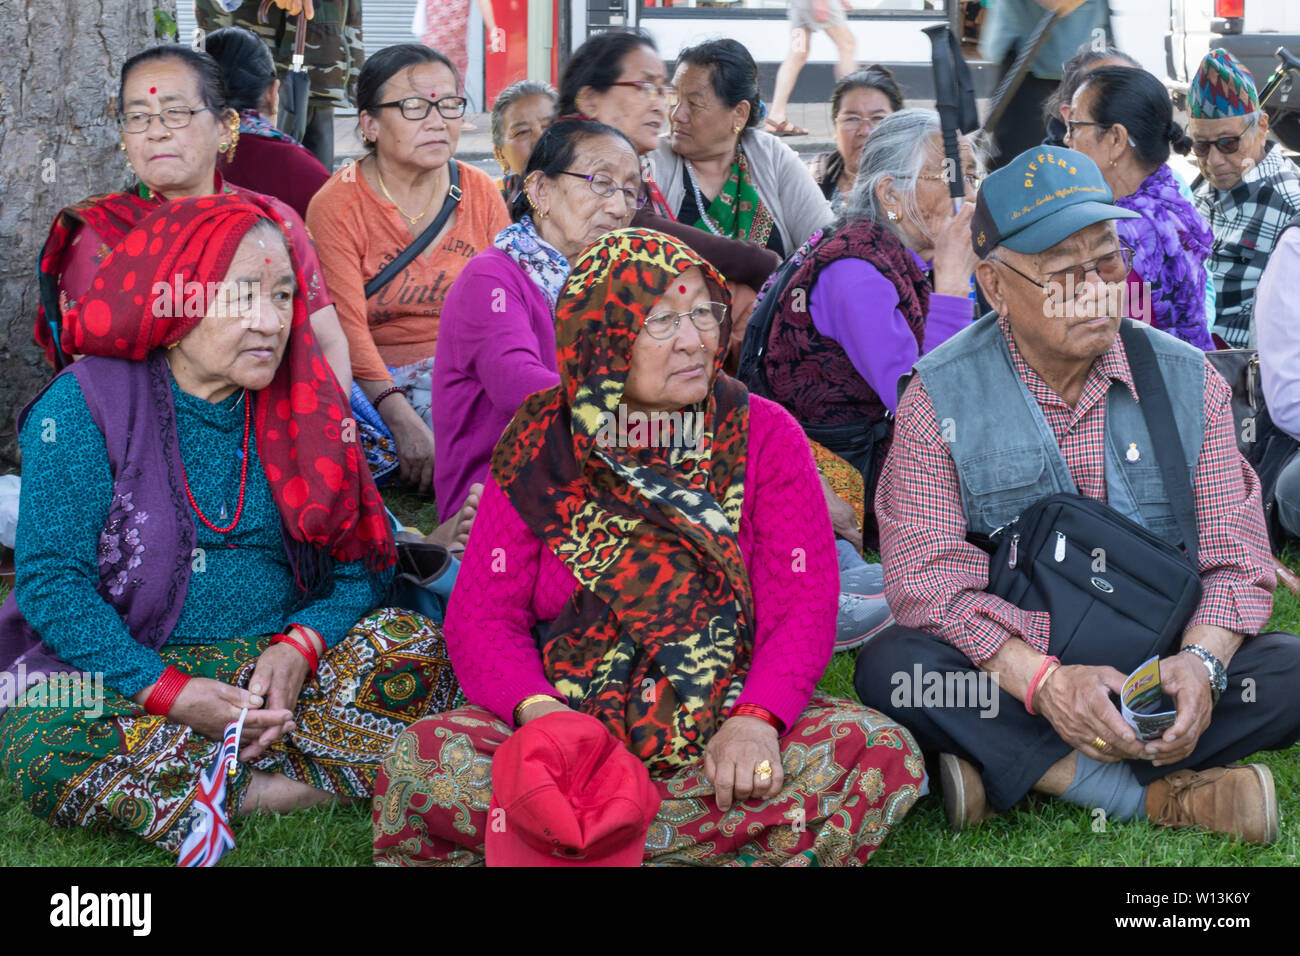 Older Nepalese community sitting in the shade at an Armed Forces Day event in Aldershot, Hampshire, UK, June 2019 Stock Photo